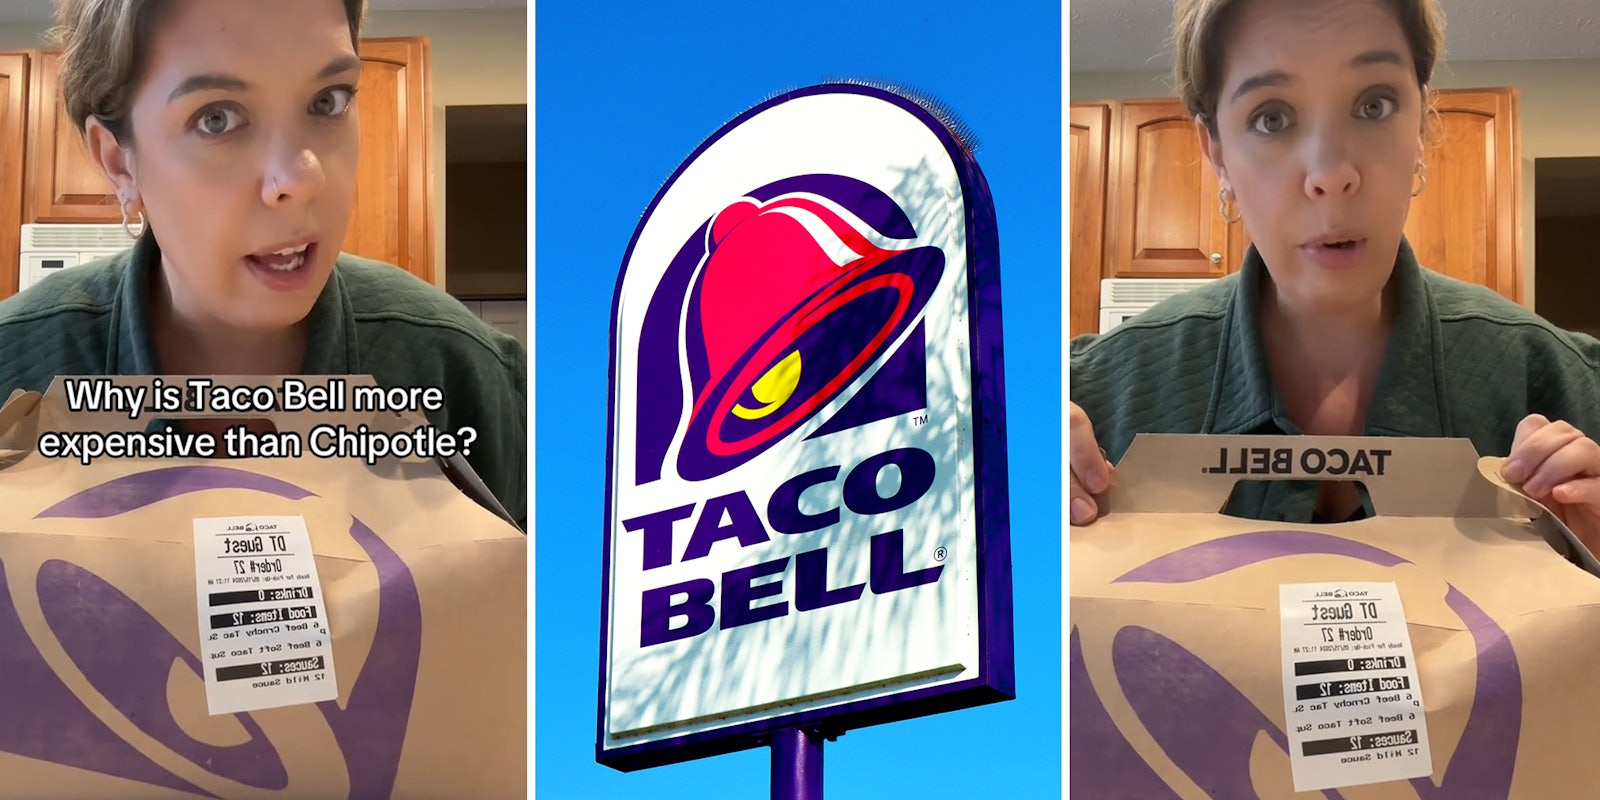 Taco Bell customer spends $32 for 6 crunchy tacos and 6 soft tacos